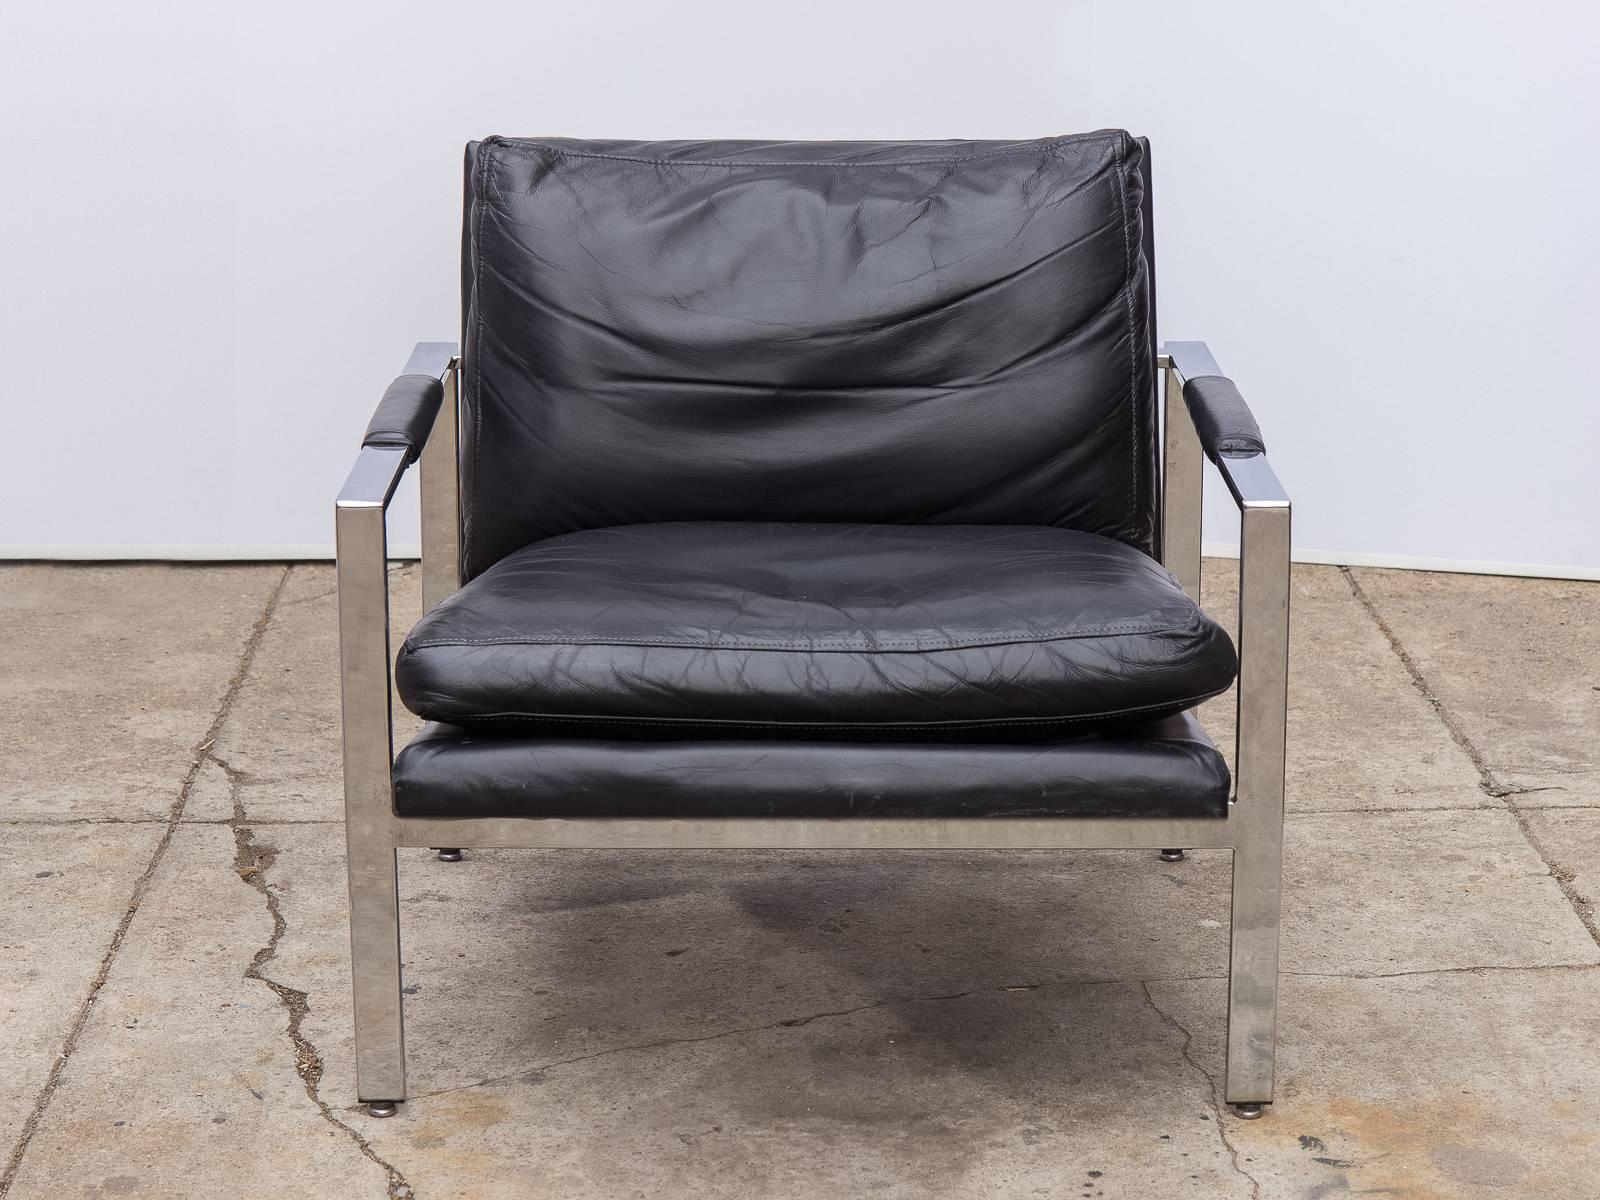 Black leather chrome armchair by California native Milo Baughman for Thayer Coggin. Comfortably plush cushions and arm pads are lovingly used the leather is soft to the touch and in good condition with no tears or holes. The solid flat-bar chrome is